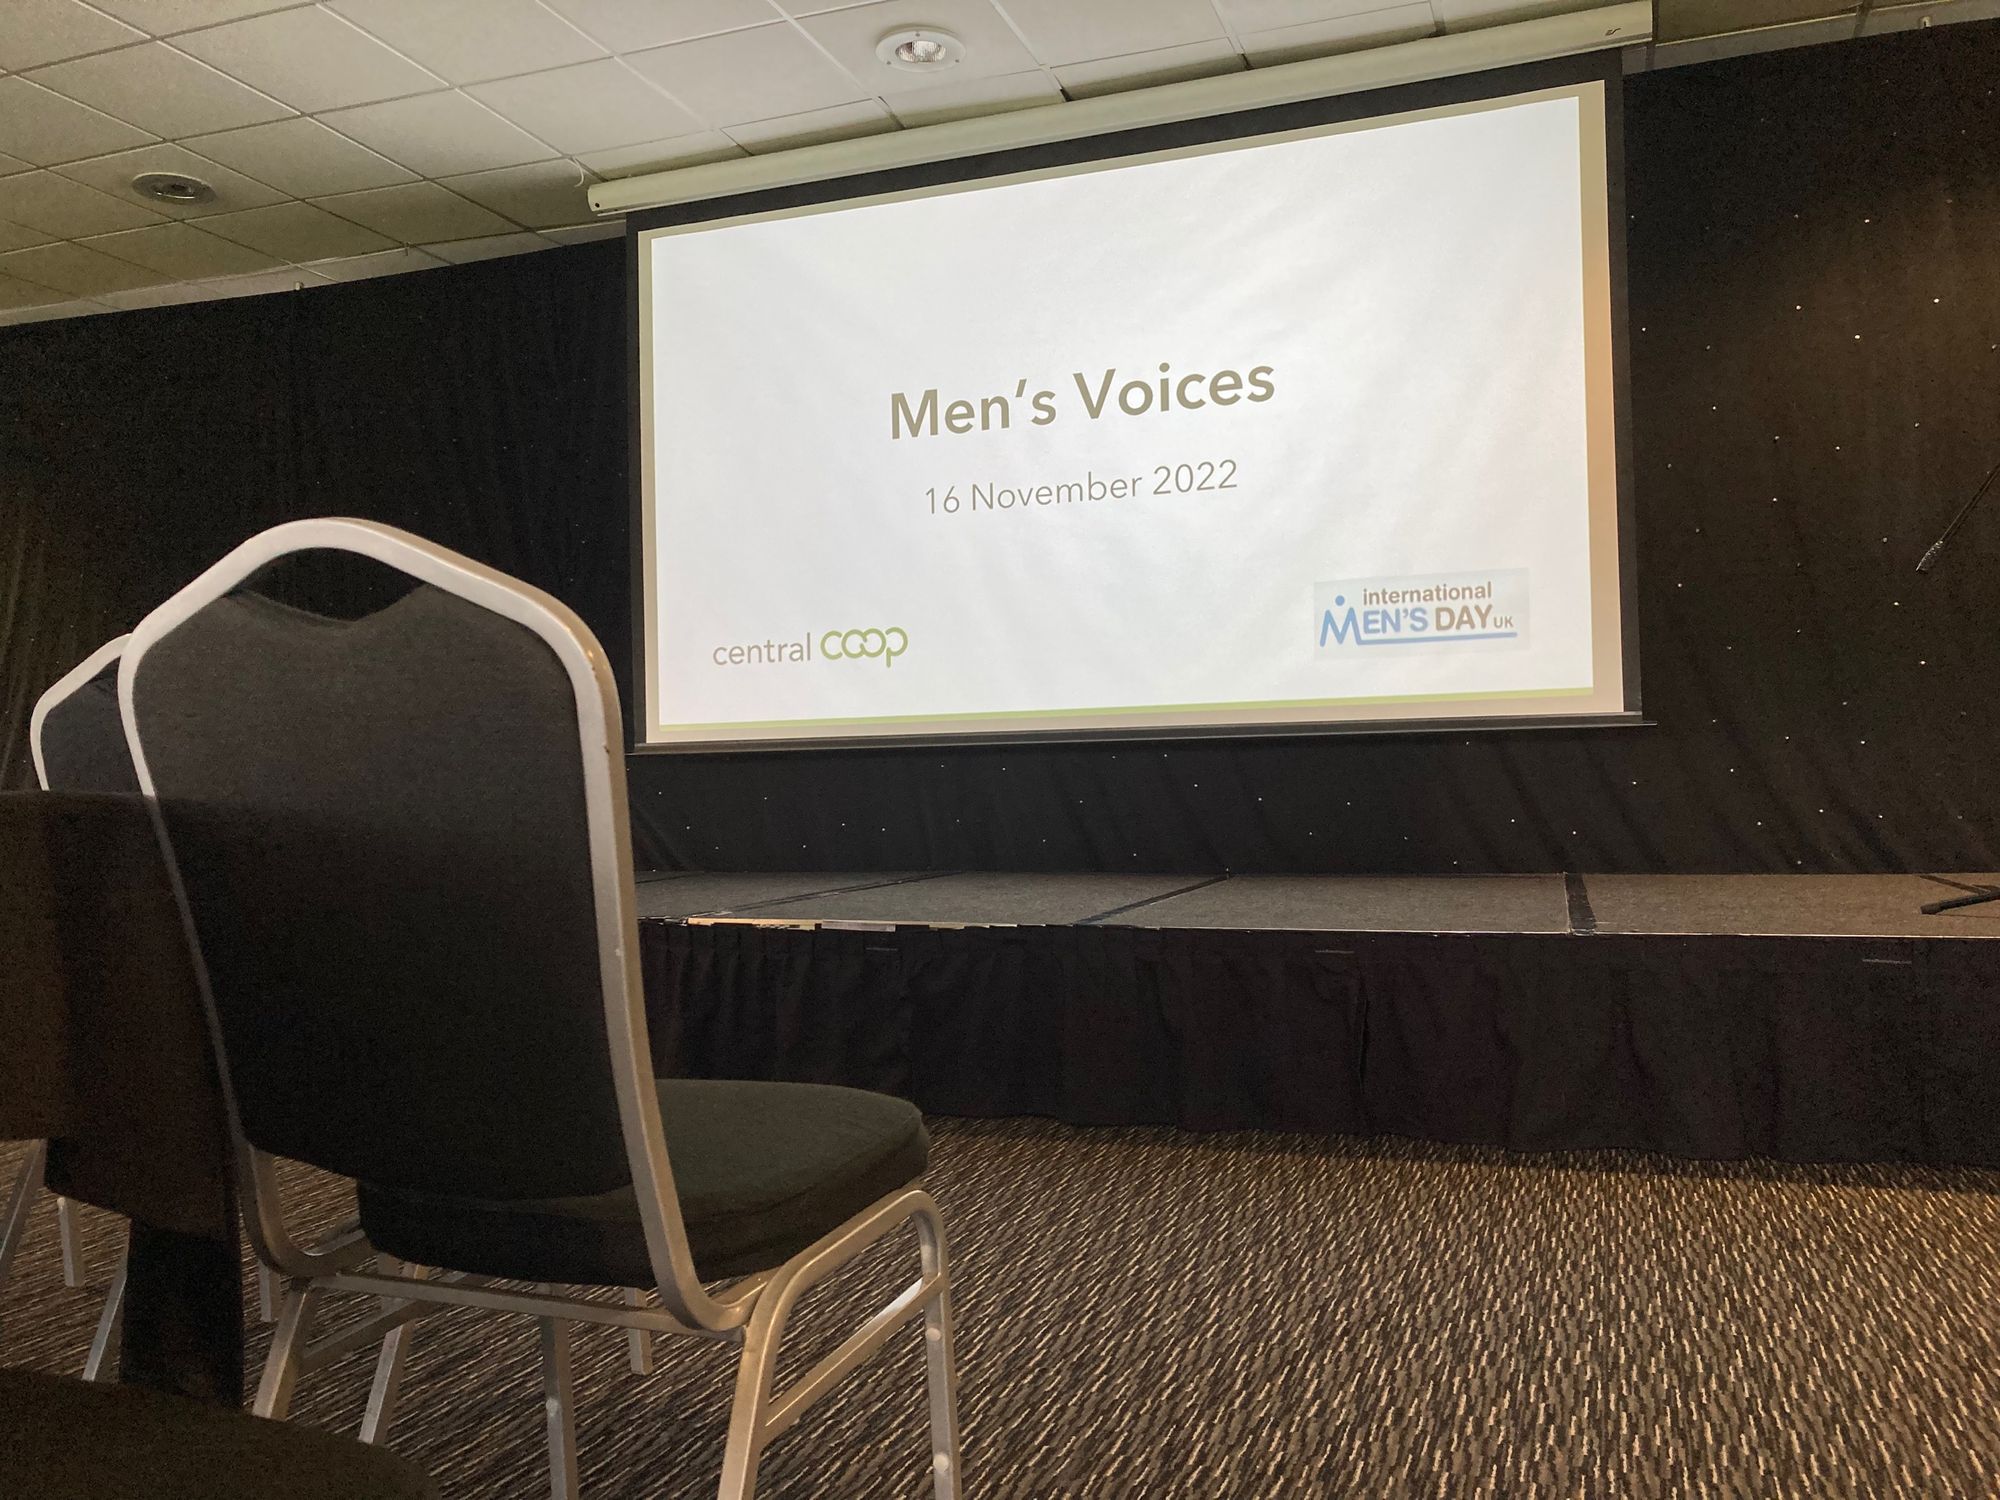 'Men's Voices' Brings together men to celebrate and talk at an event for 'International Men's Day'